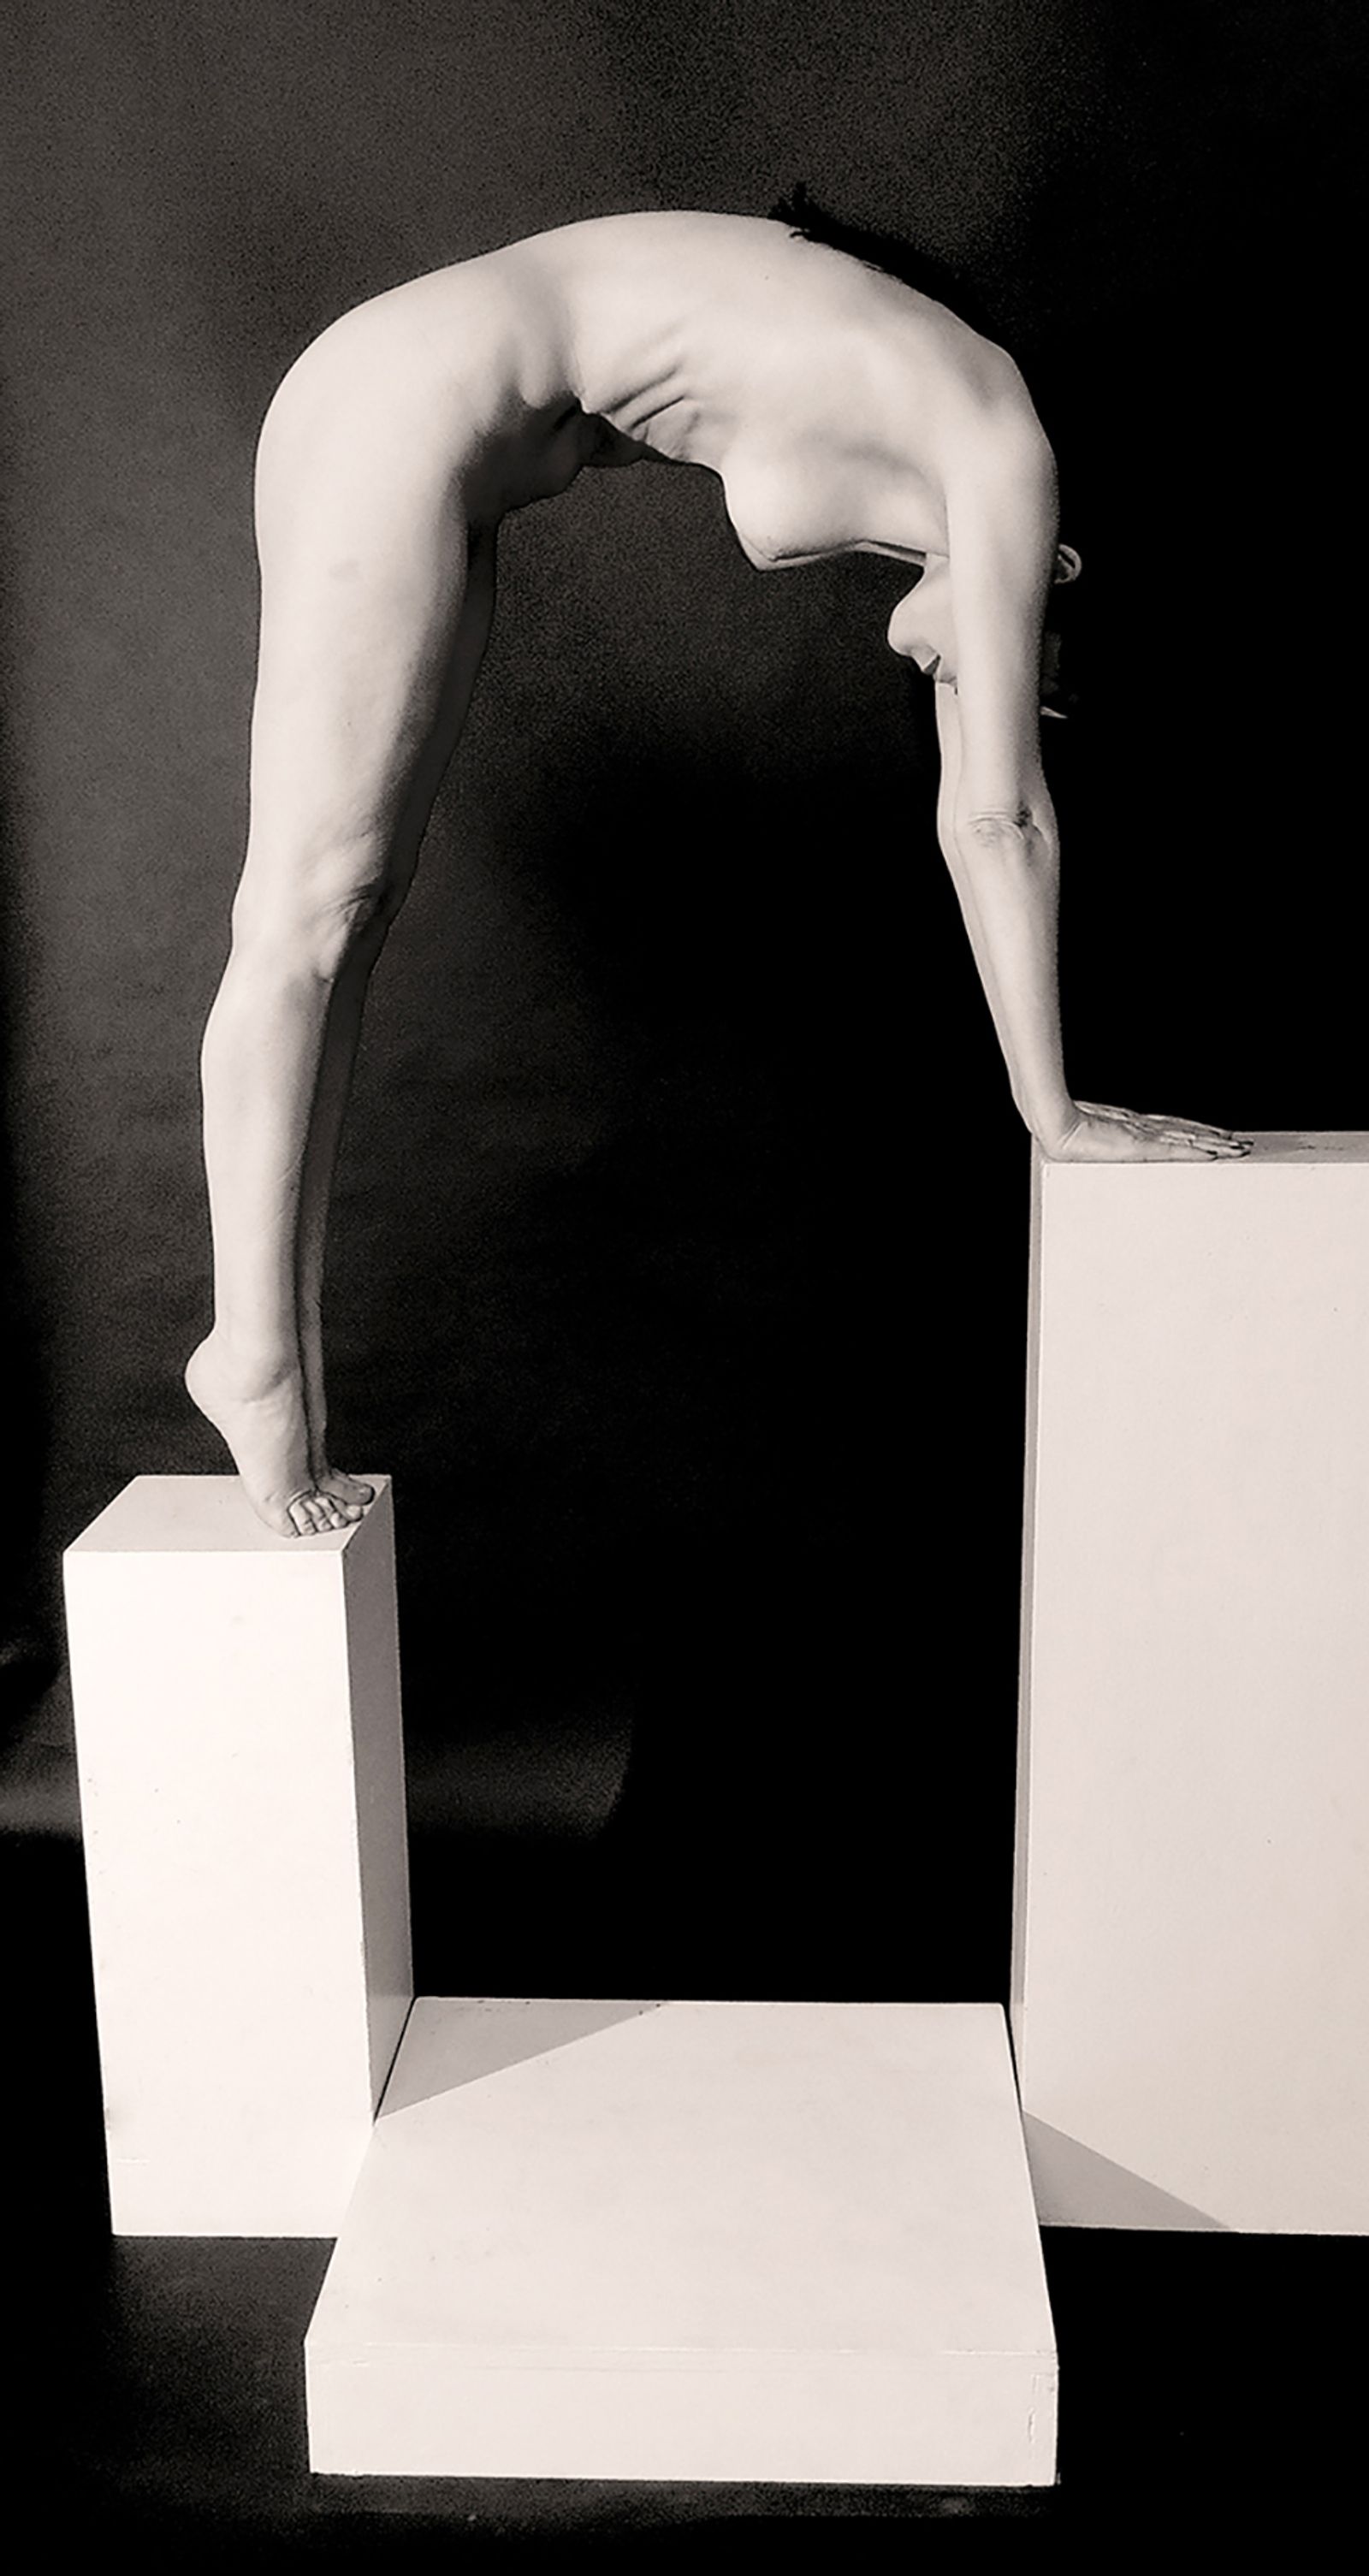 © Frederic Crist - Image from the Pedestal Series photography project